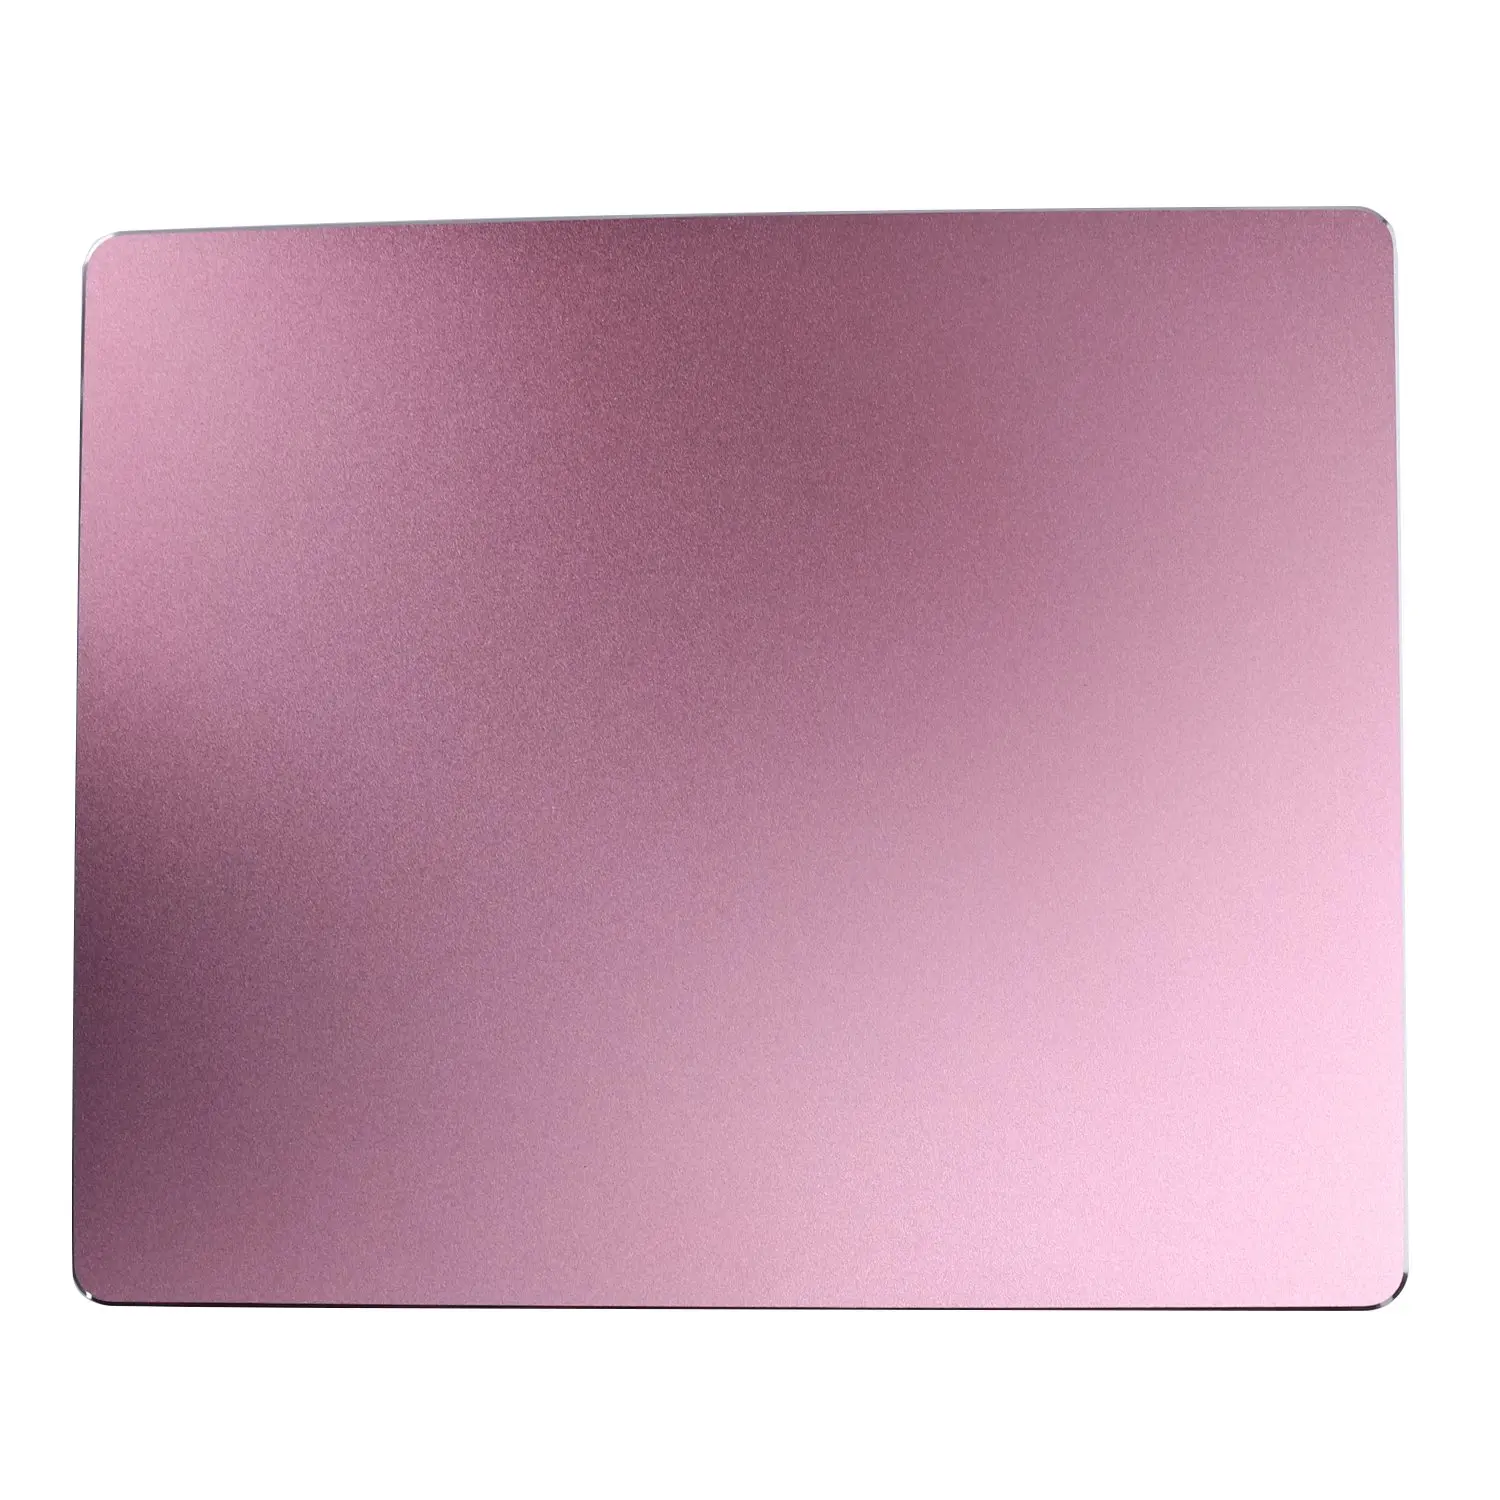 246x202Mm Frosted Matte Slim Aluminum Mouse Pad Pc Computer Skid Laptop Gaming Mousepad For Apple Mackbook | Компьютеры и офис